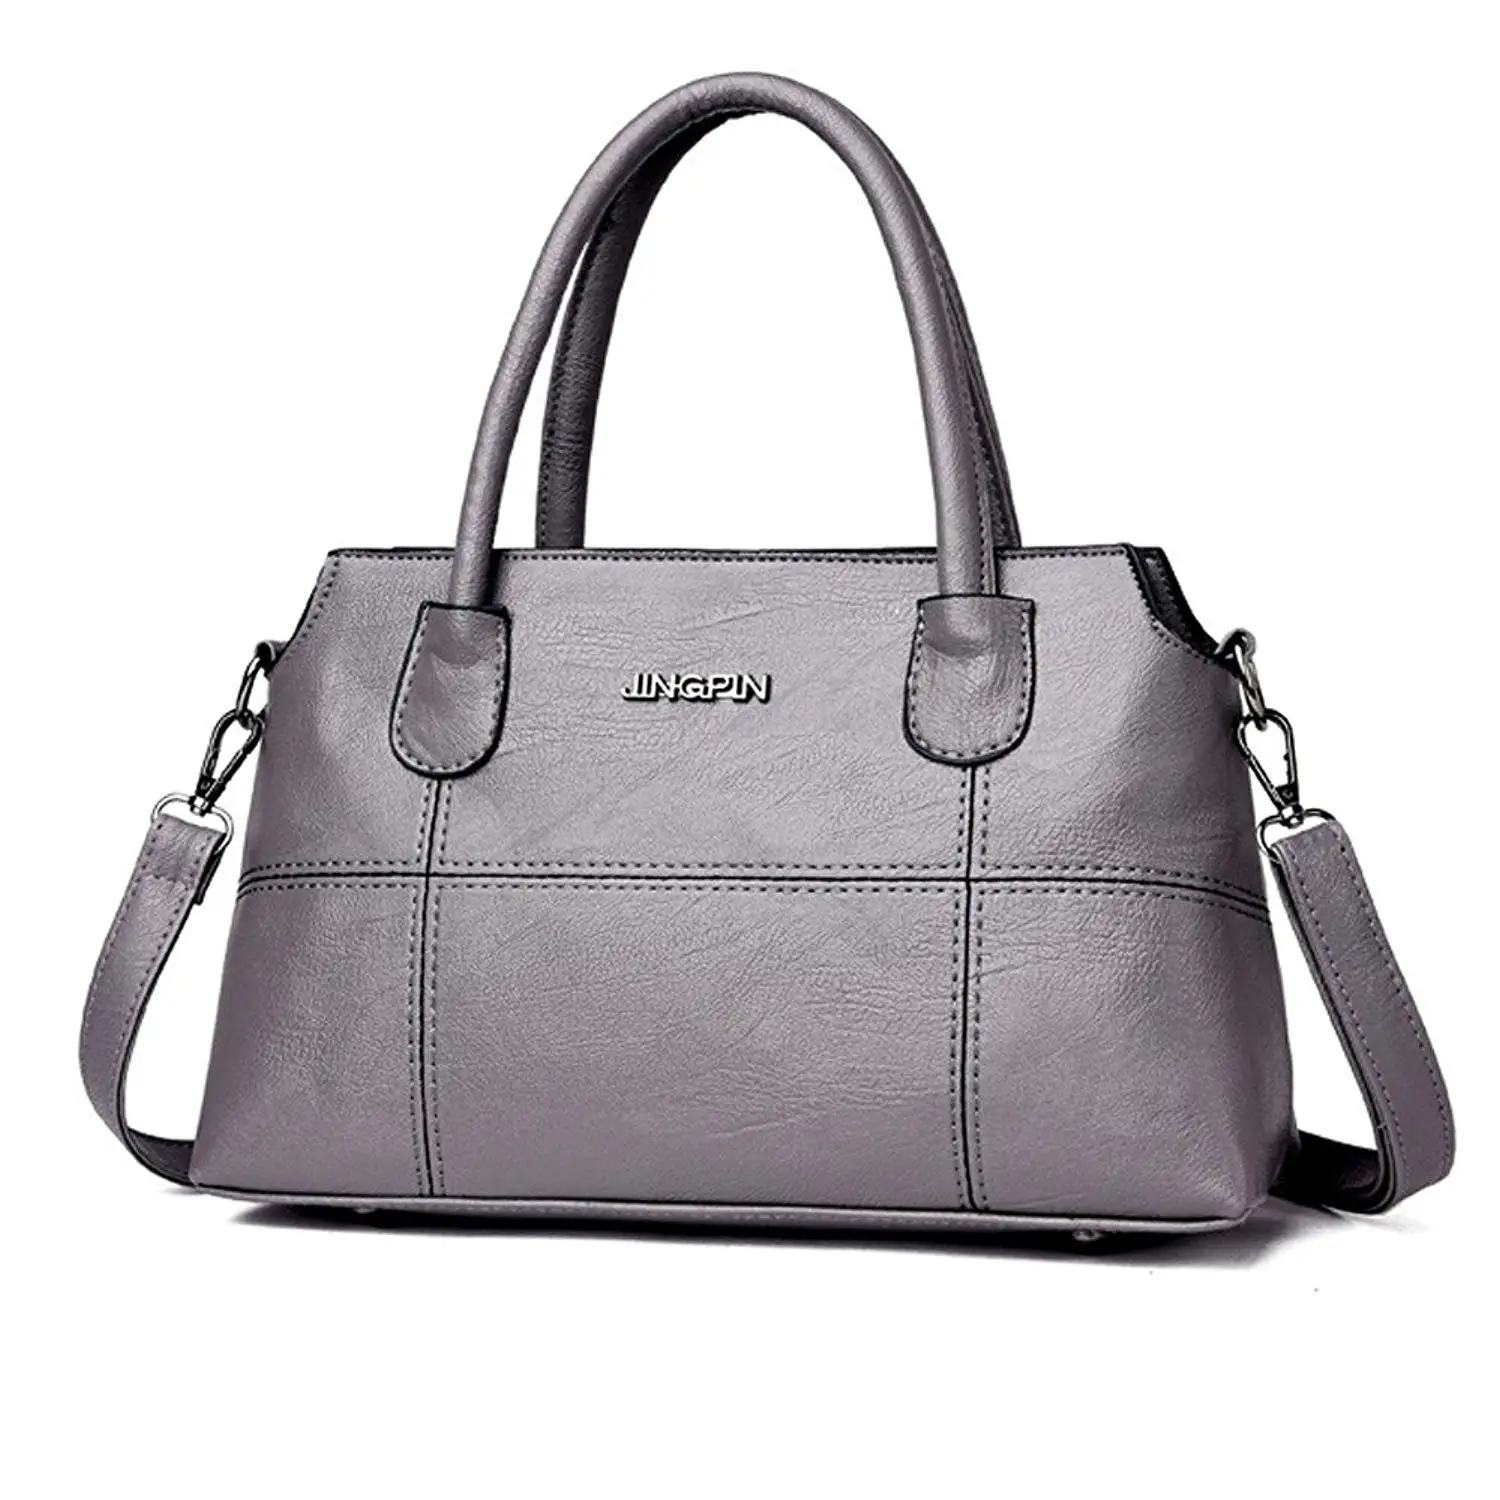 Cheap Tosoco Bag, find Tosoco Bag deals on line at Alibaba.com